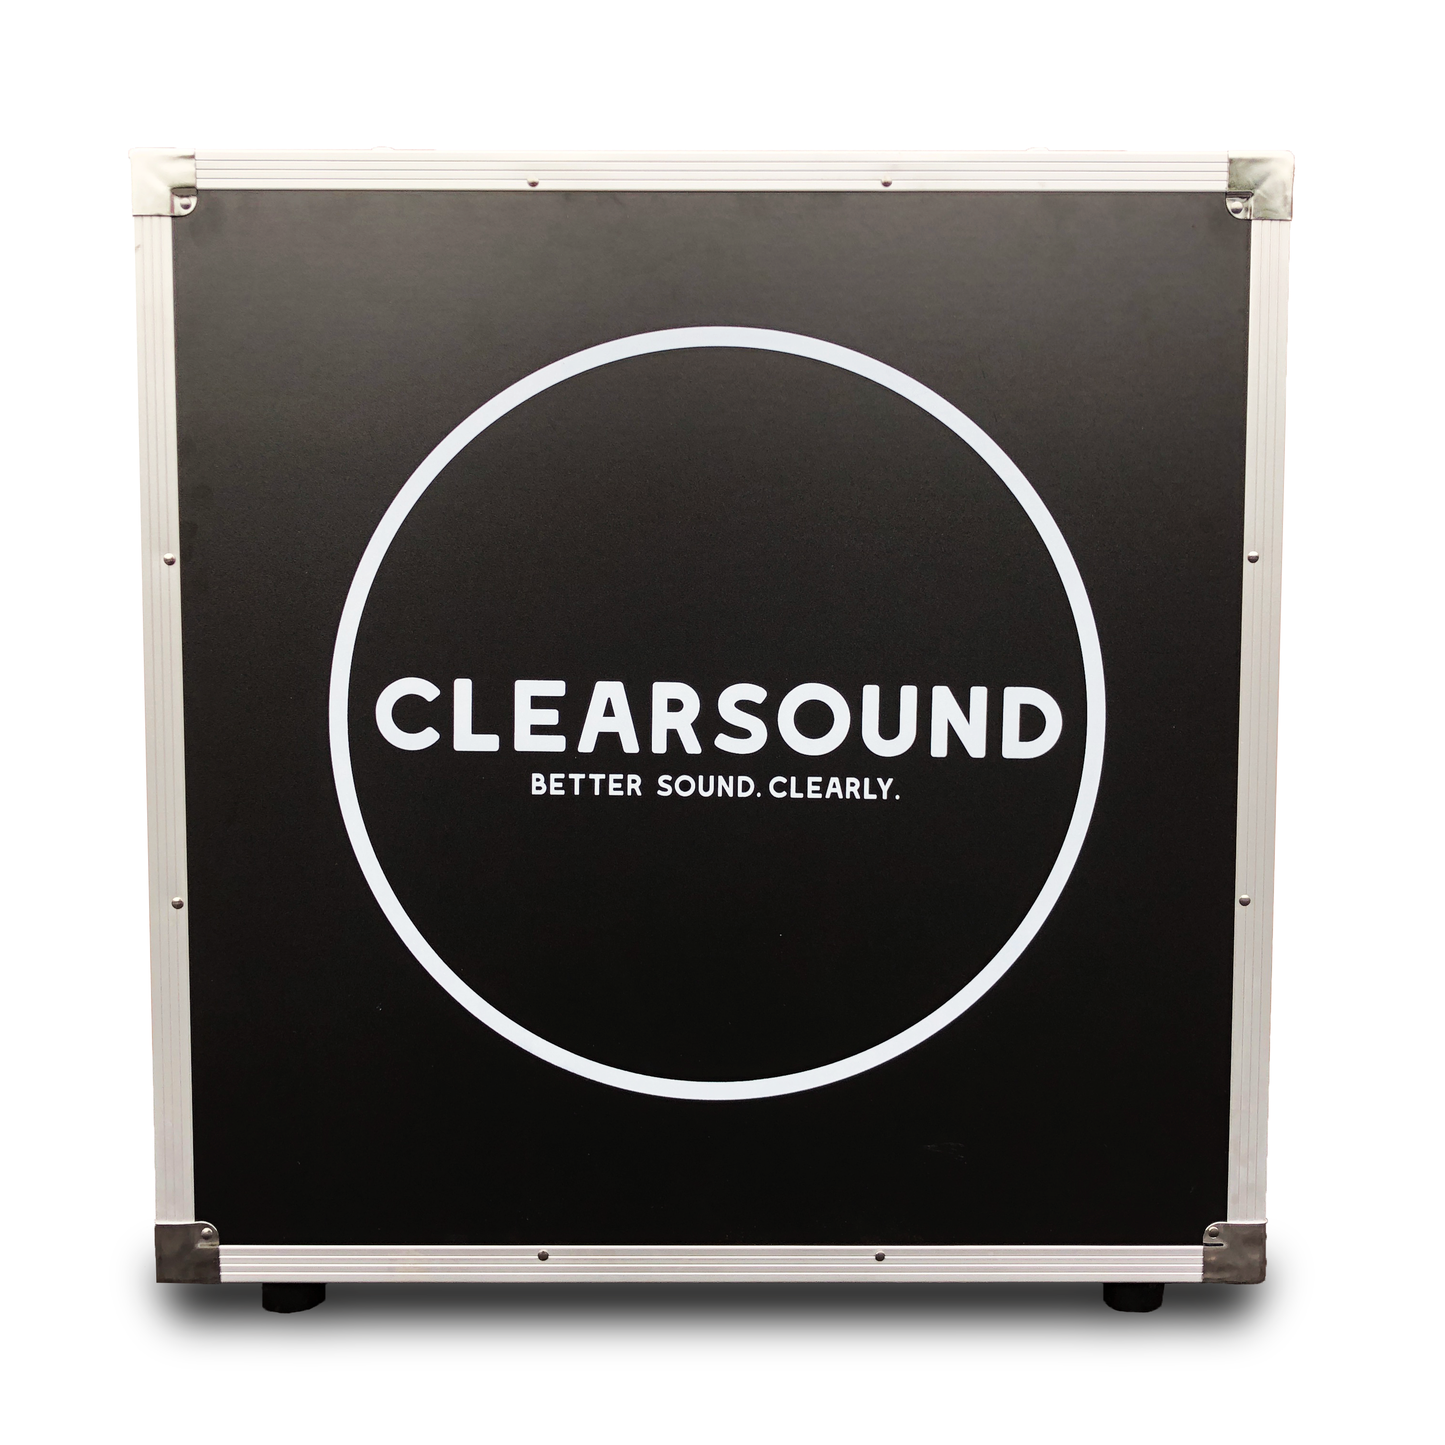 "The Clearsound Complete" Package - Clearsound Baffles